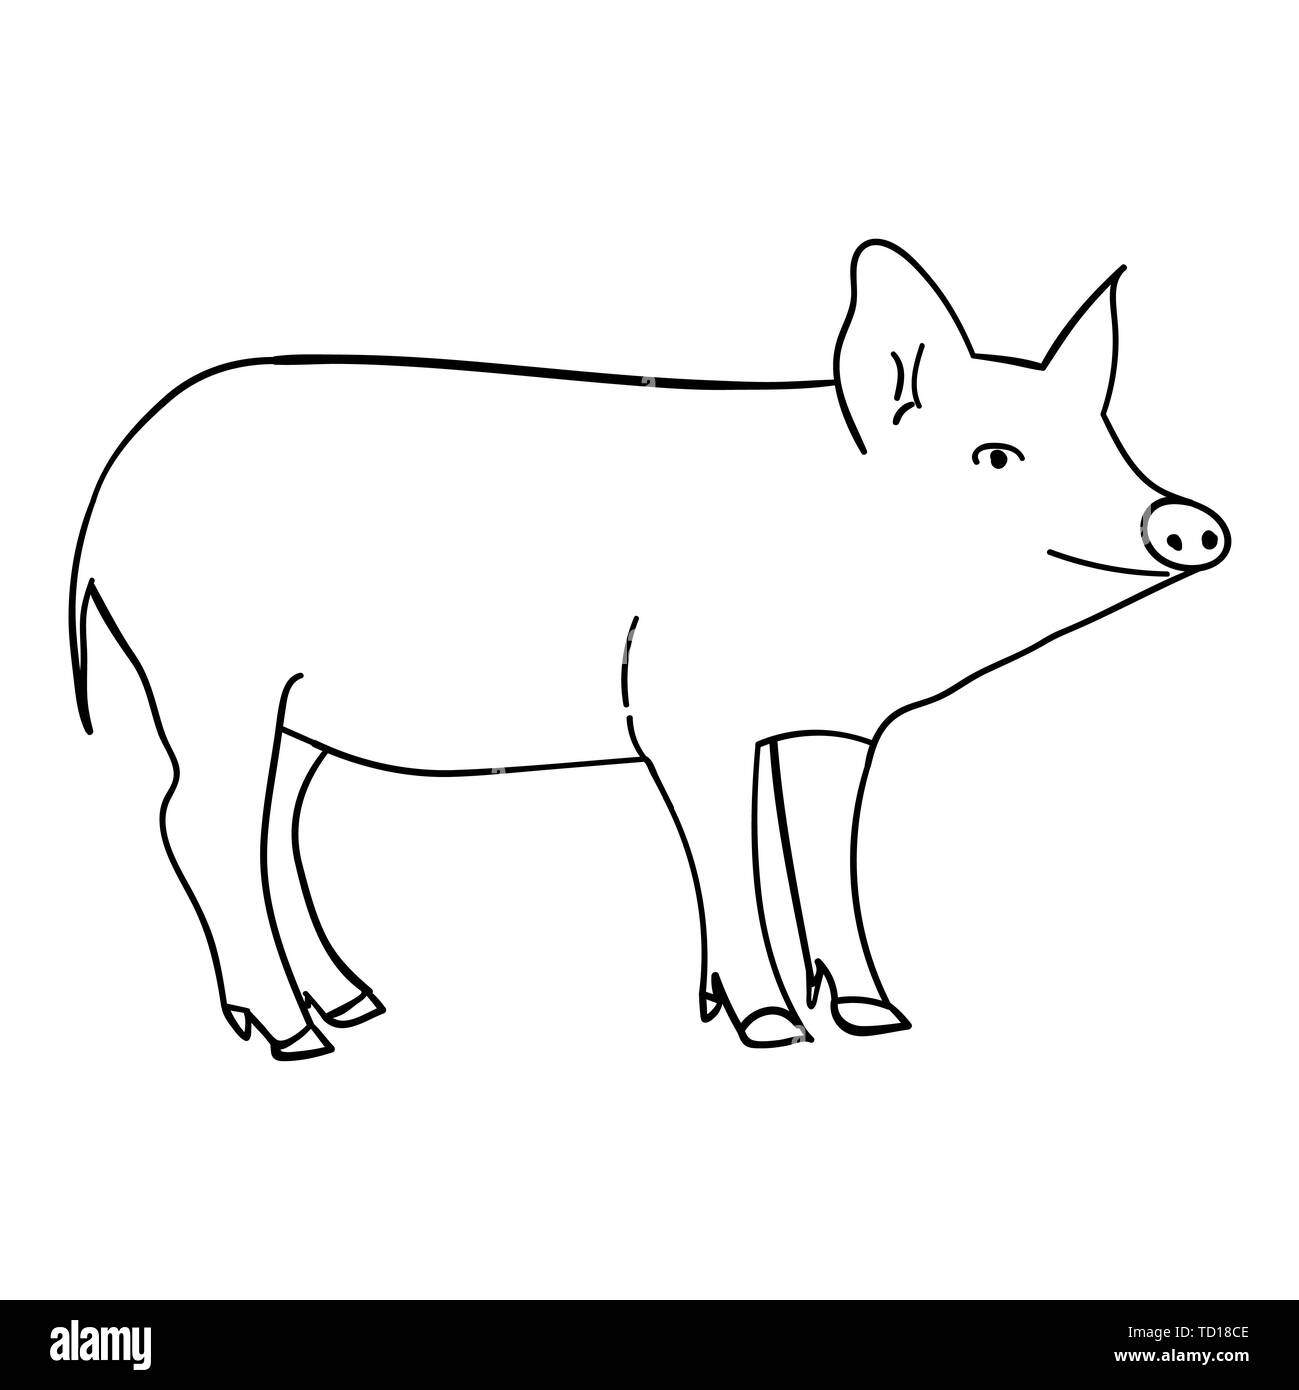 Contour pig in doodle style.  illustration on white background. Stock Photo